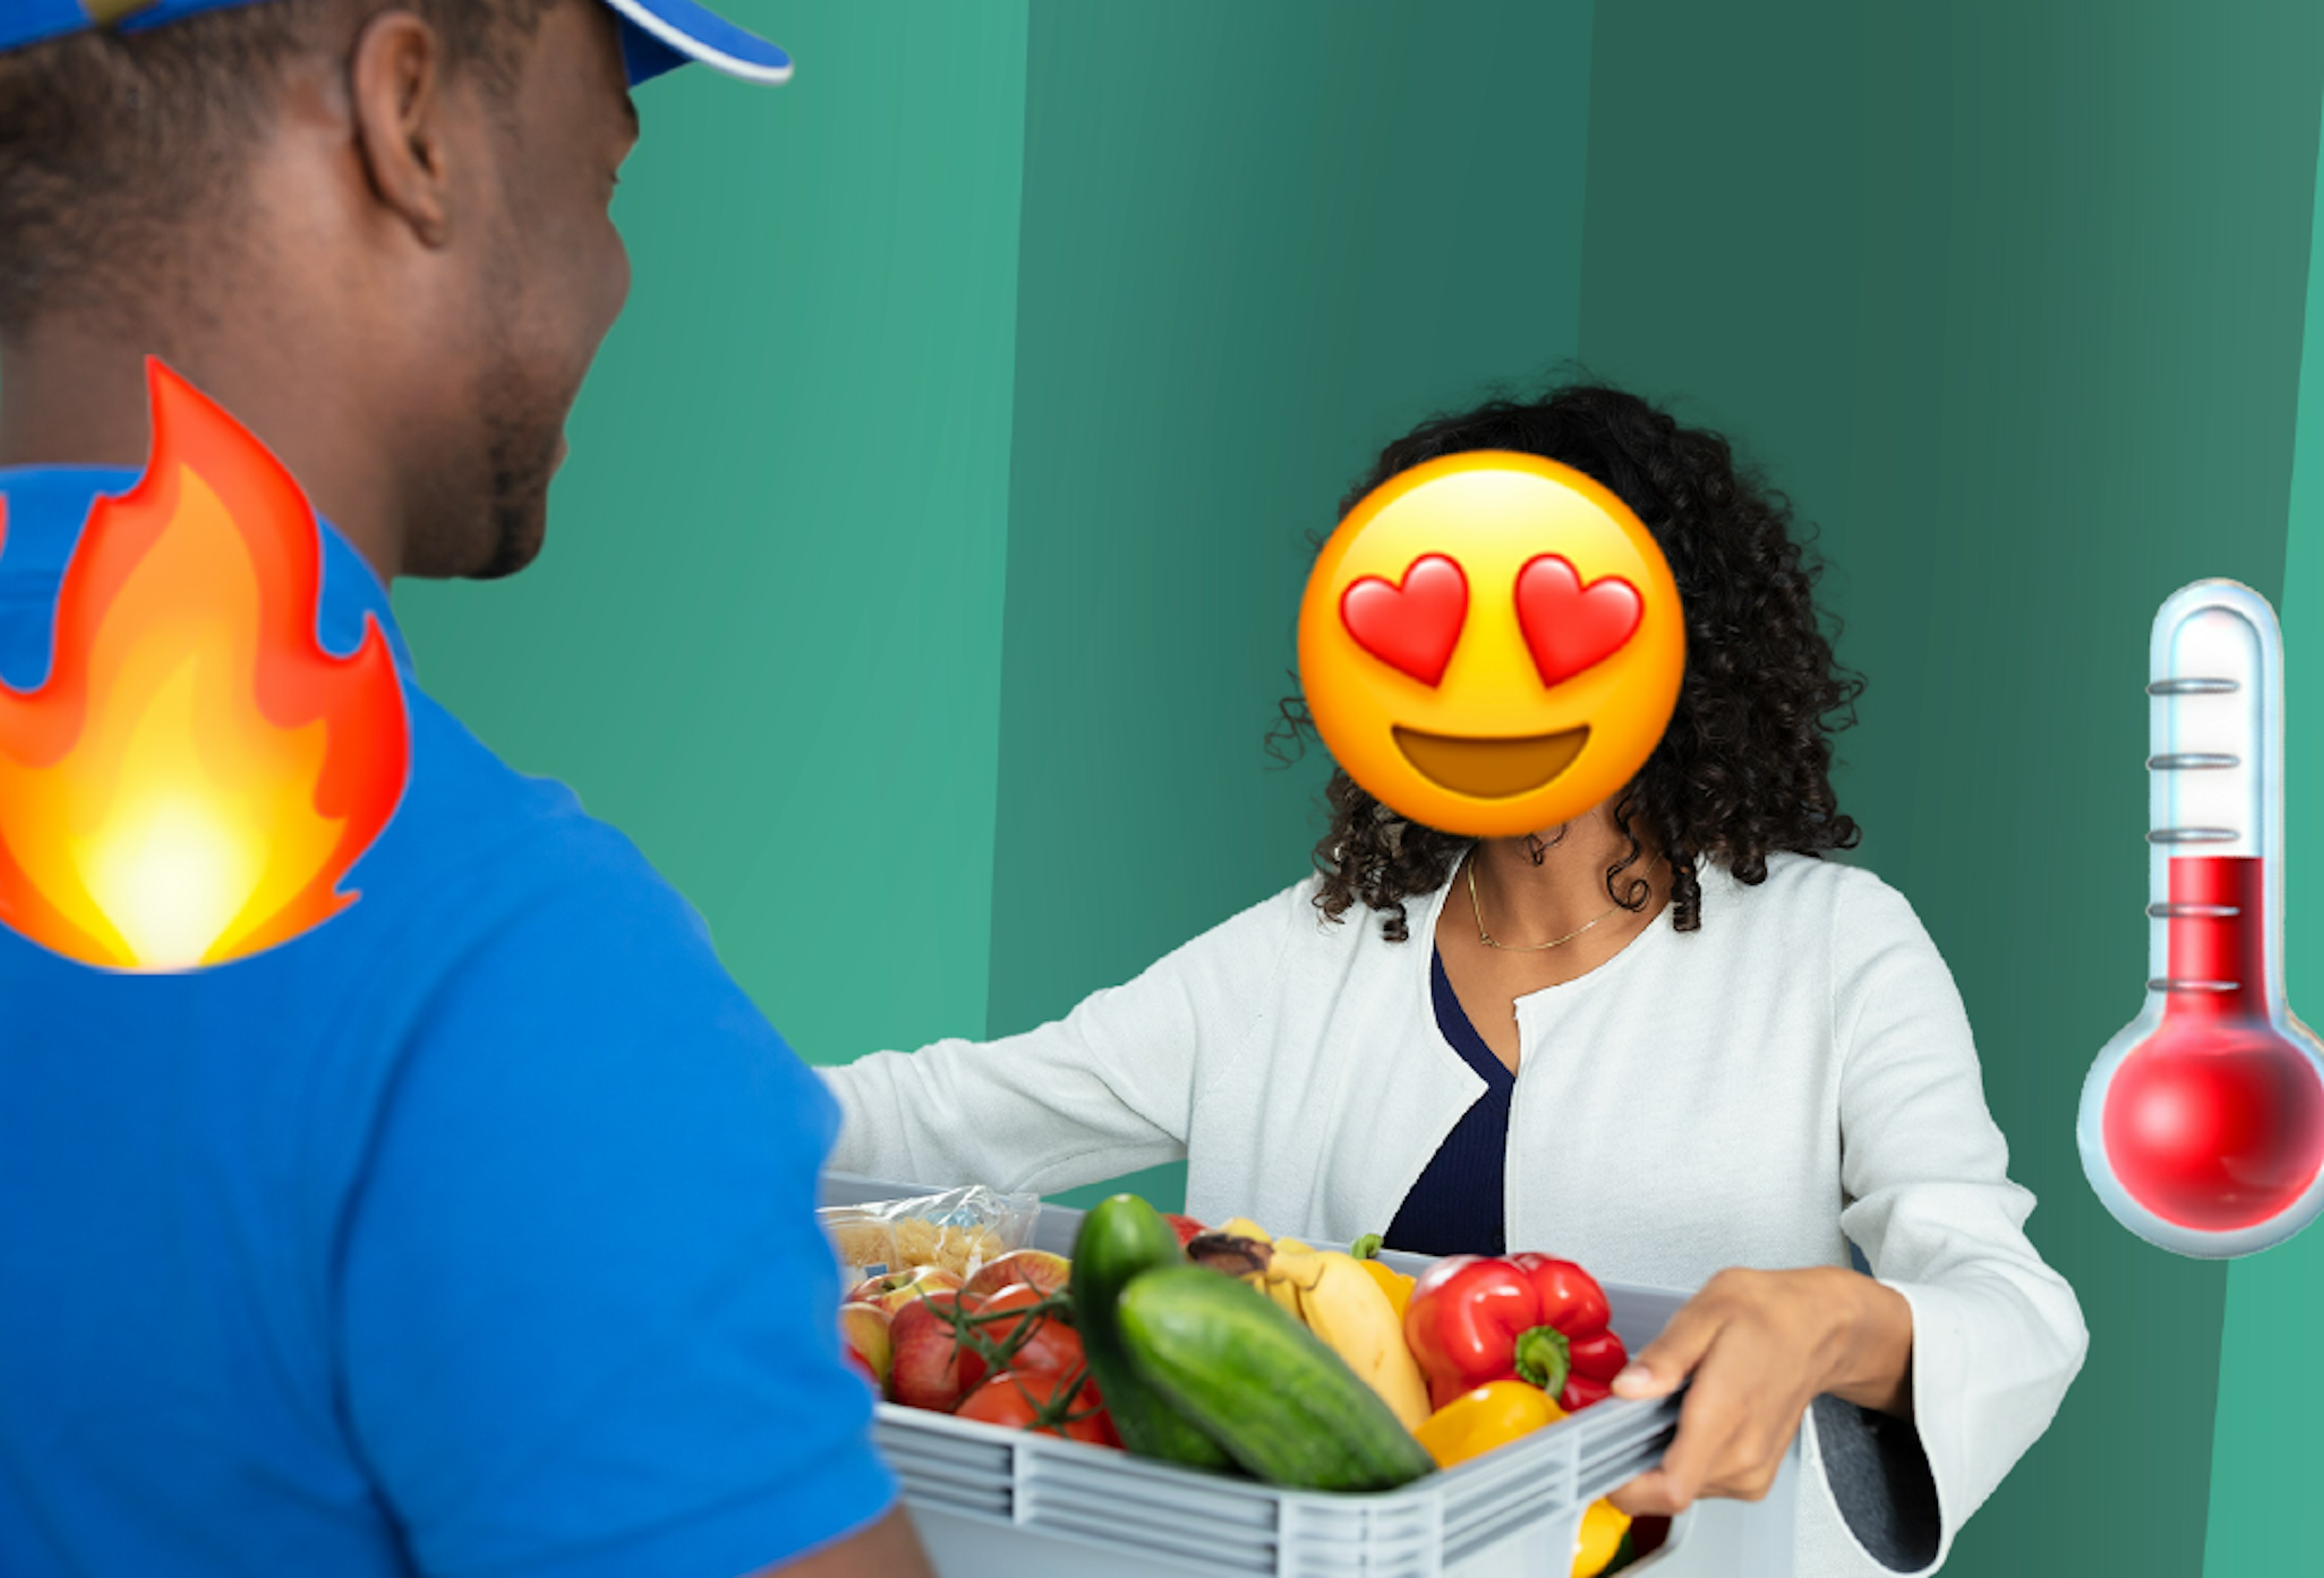 Grocery delivery driver in a blue baseball hat and shirt passing a crate of vegetables to a customer. The customer has a happy face with heart eyes emoji as their head